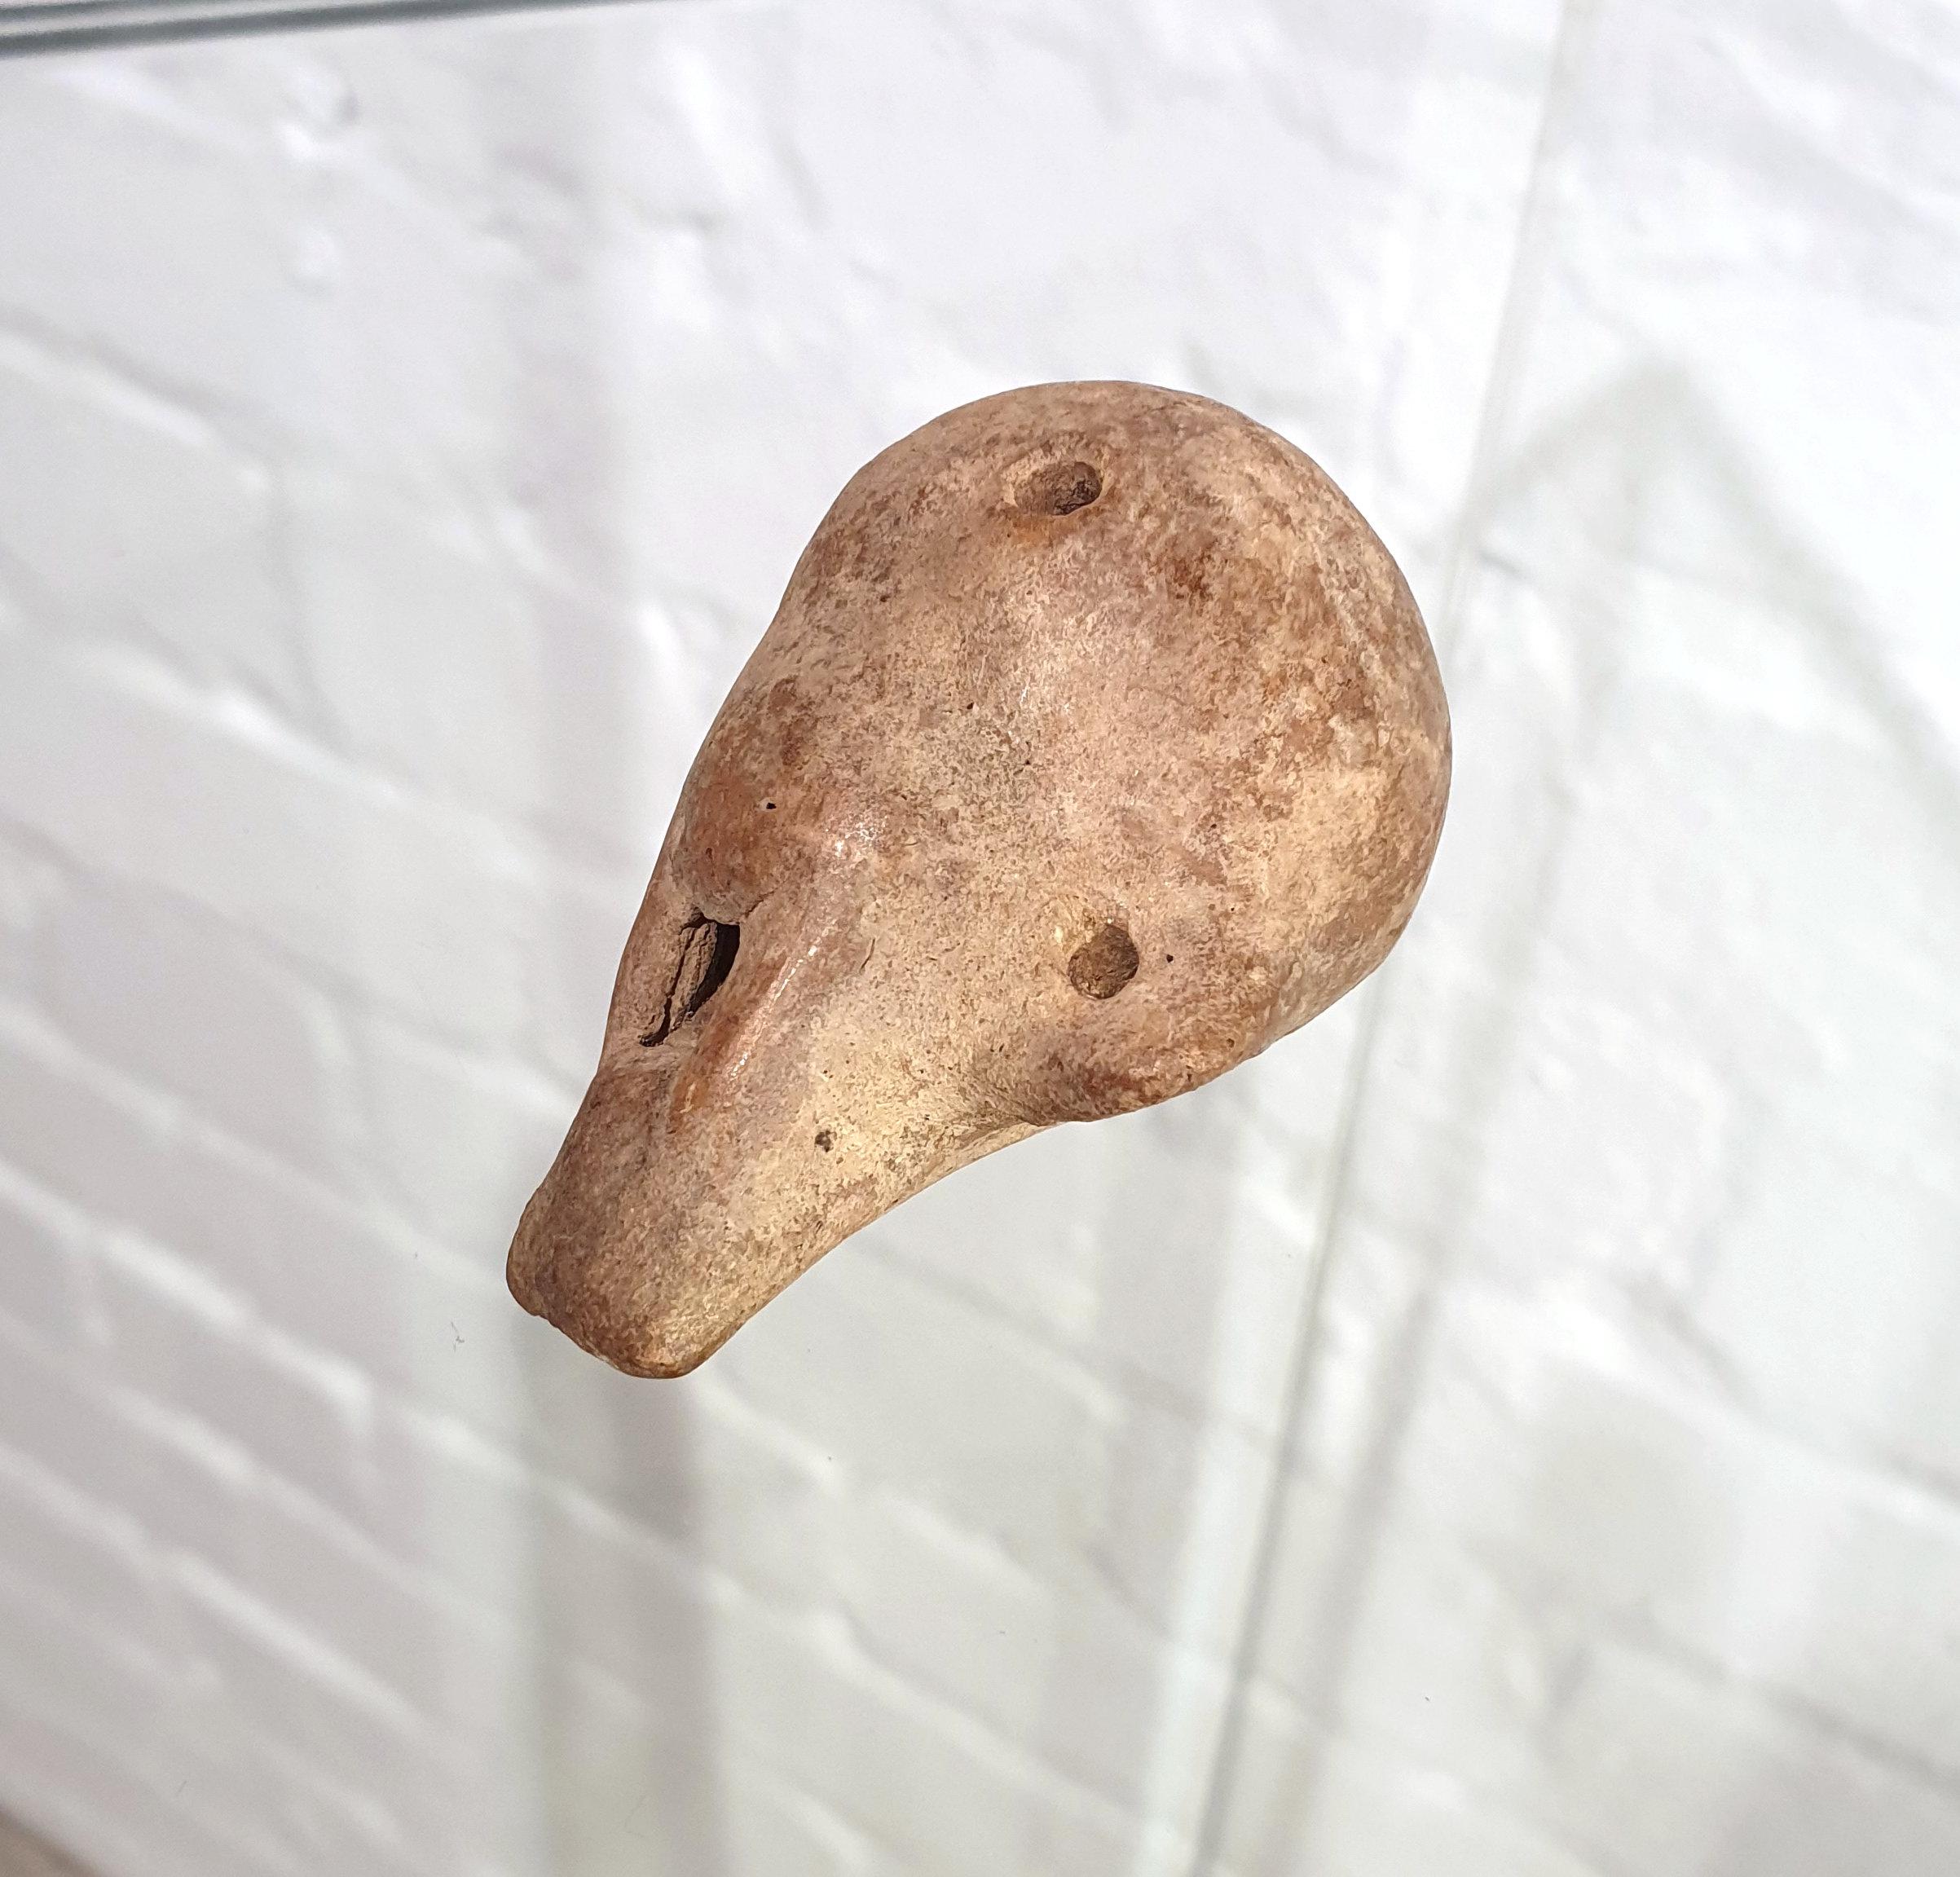 This unique and amazing Ecuadorian primitive piece is a whistle carved in a skull form, and dates to the formative stage from the woodland period. It measures 2 in – 5 cm wide, 2 ½ in – 6 cm deep and 1 ½ in – 4 cm in height. The whistle has